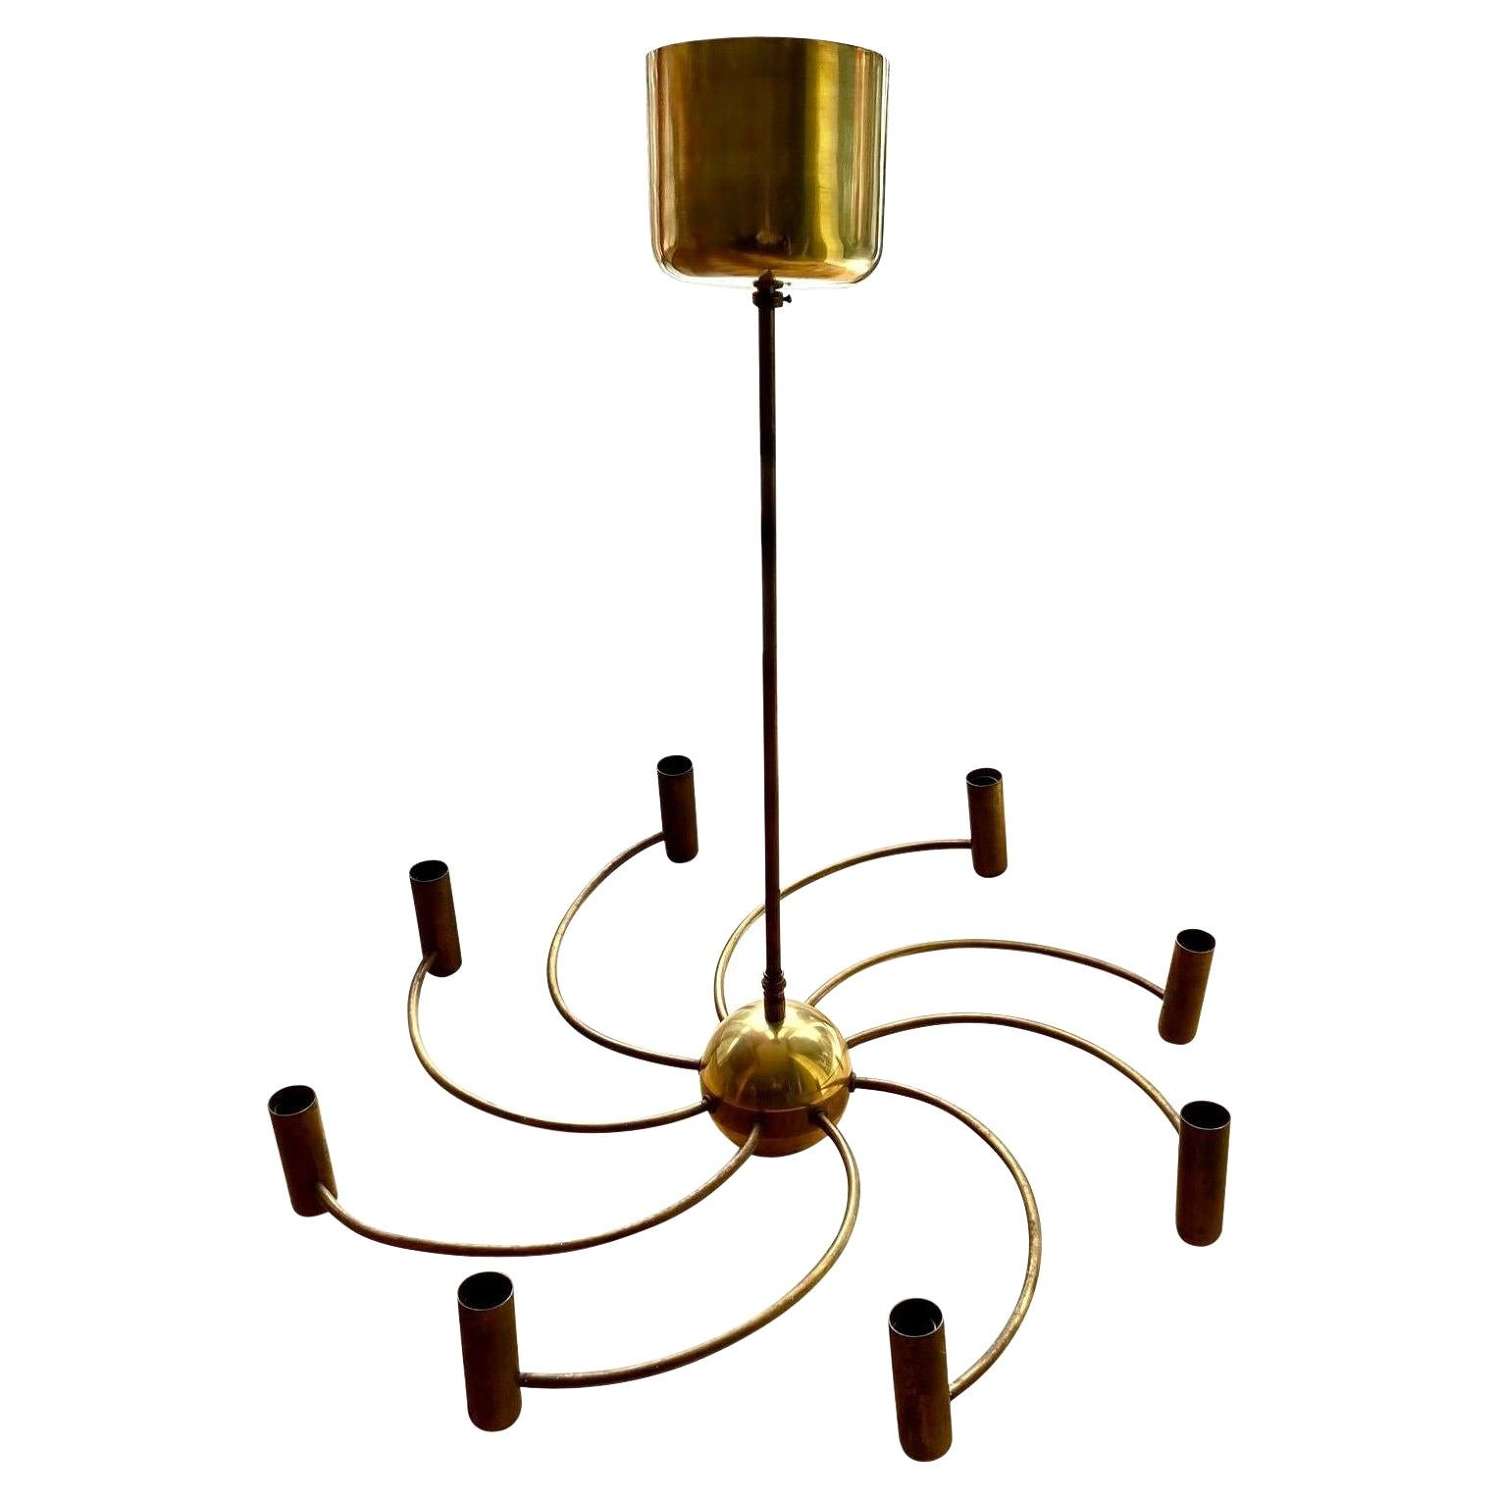 8 Arms Brass Chandelier, Europe, 1950's, Unusual Oversized Rose